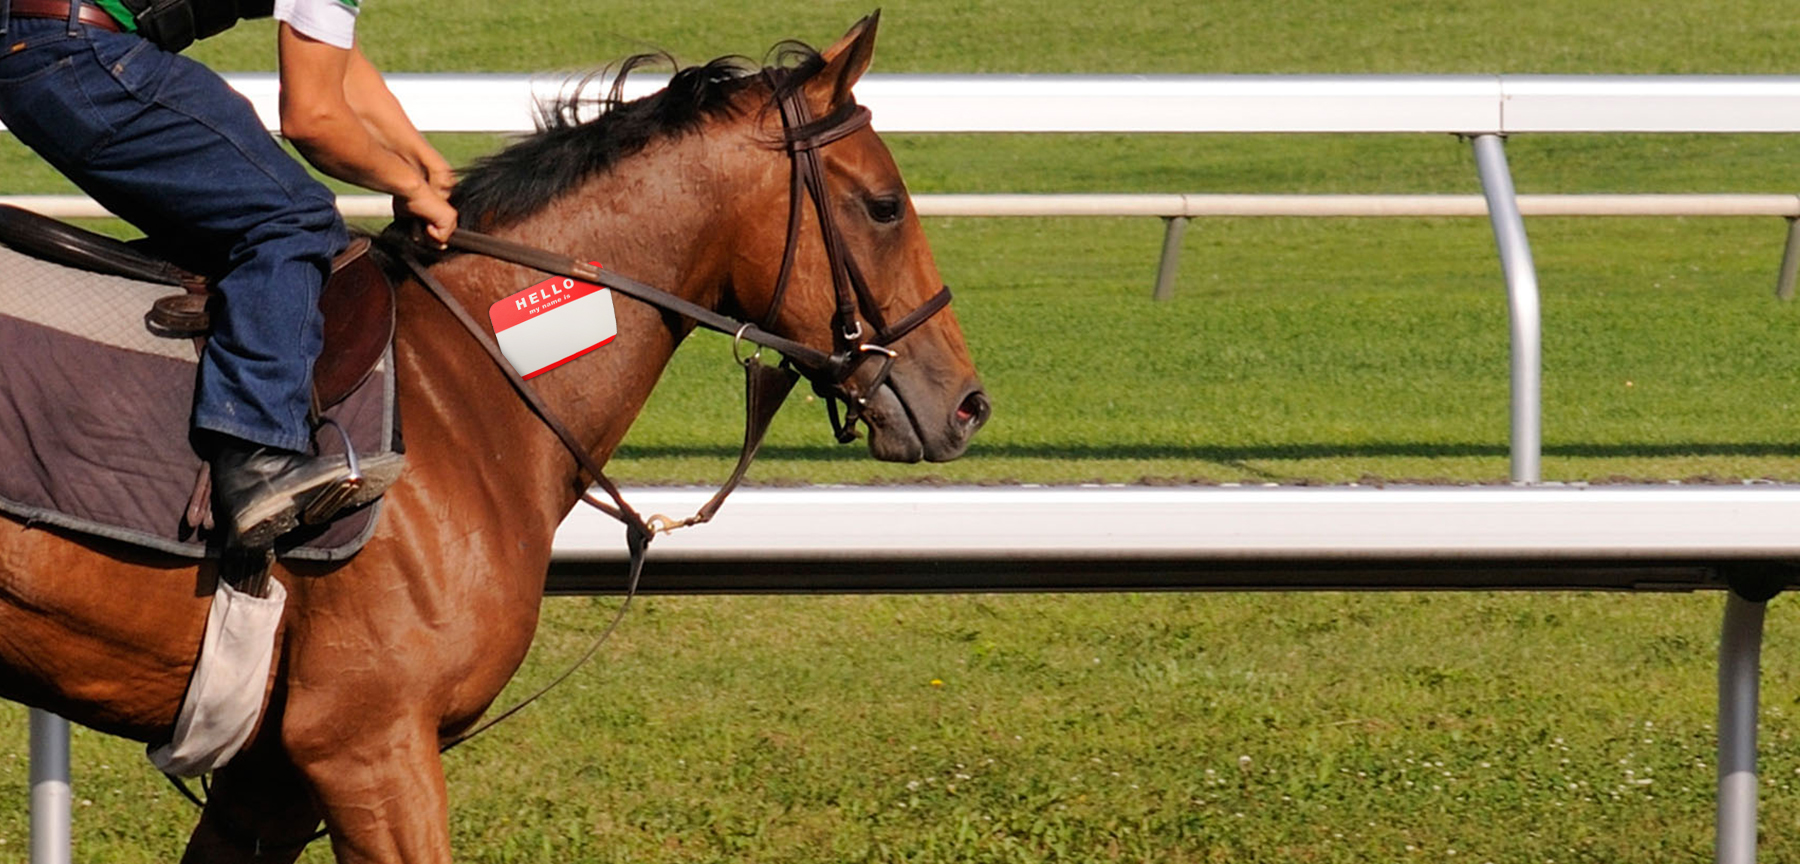 A horse wearing a nametag.